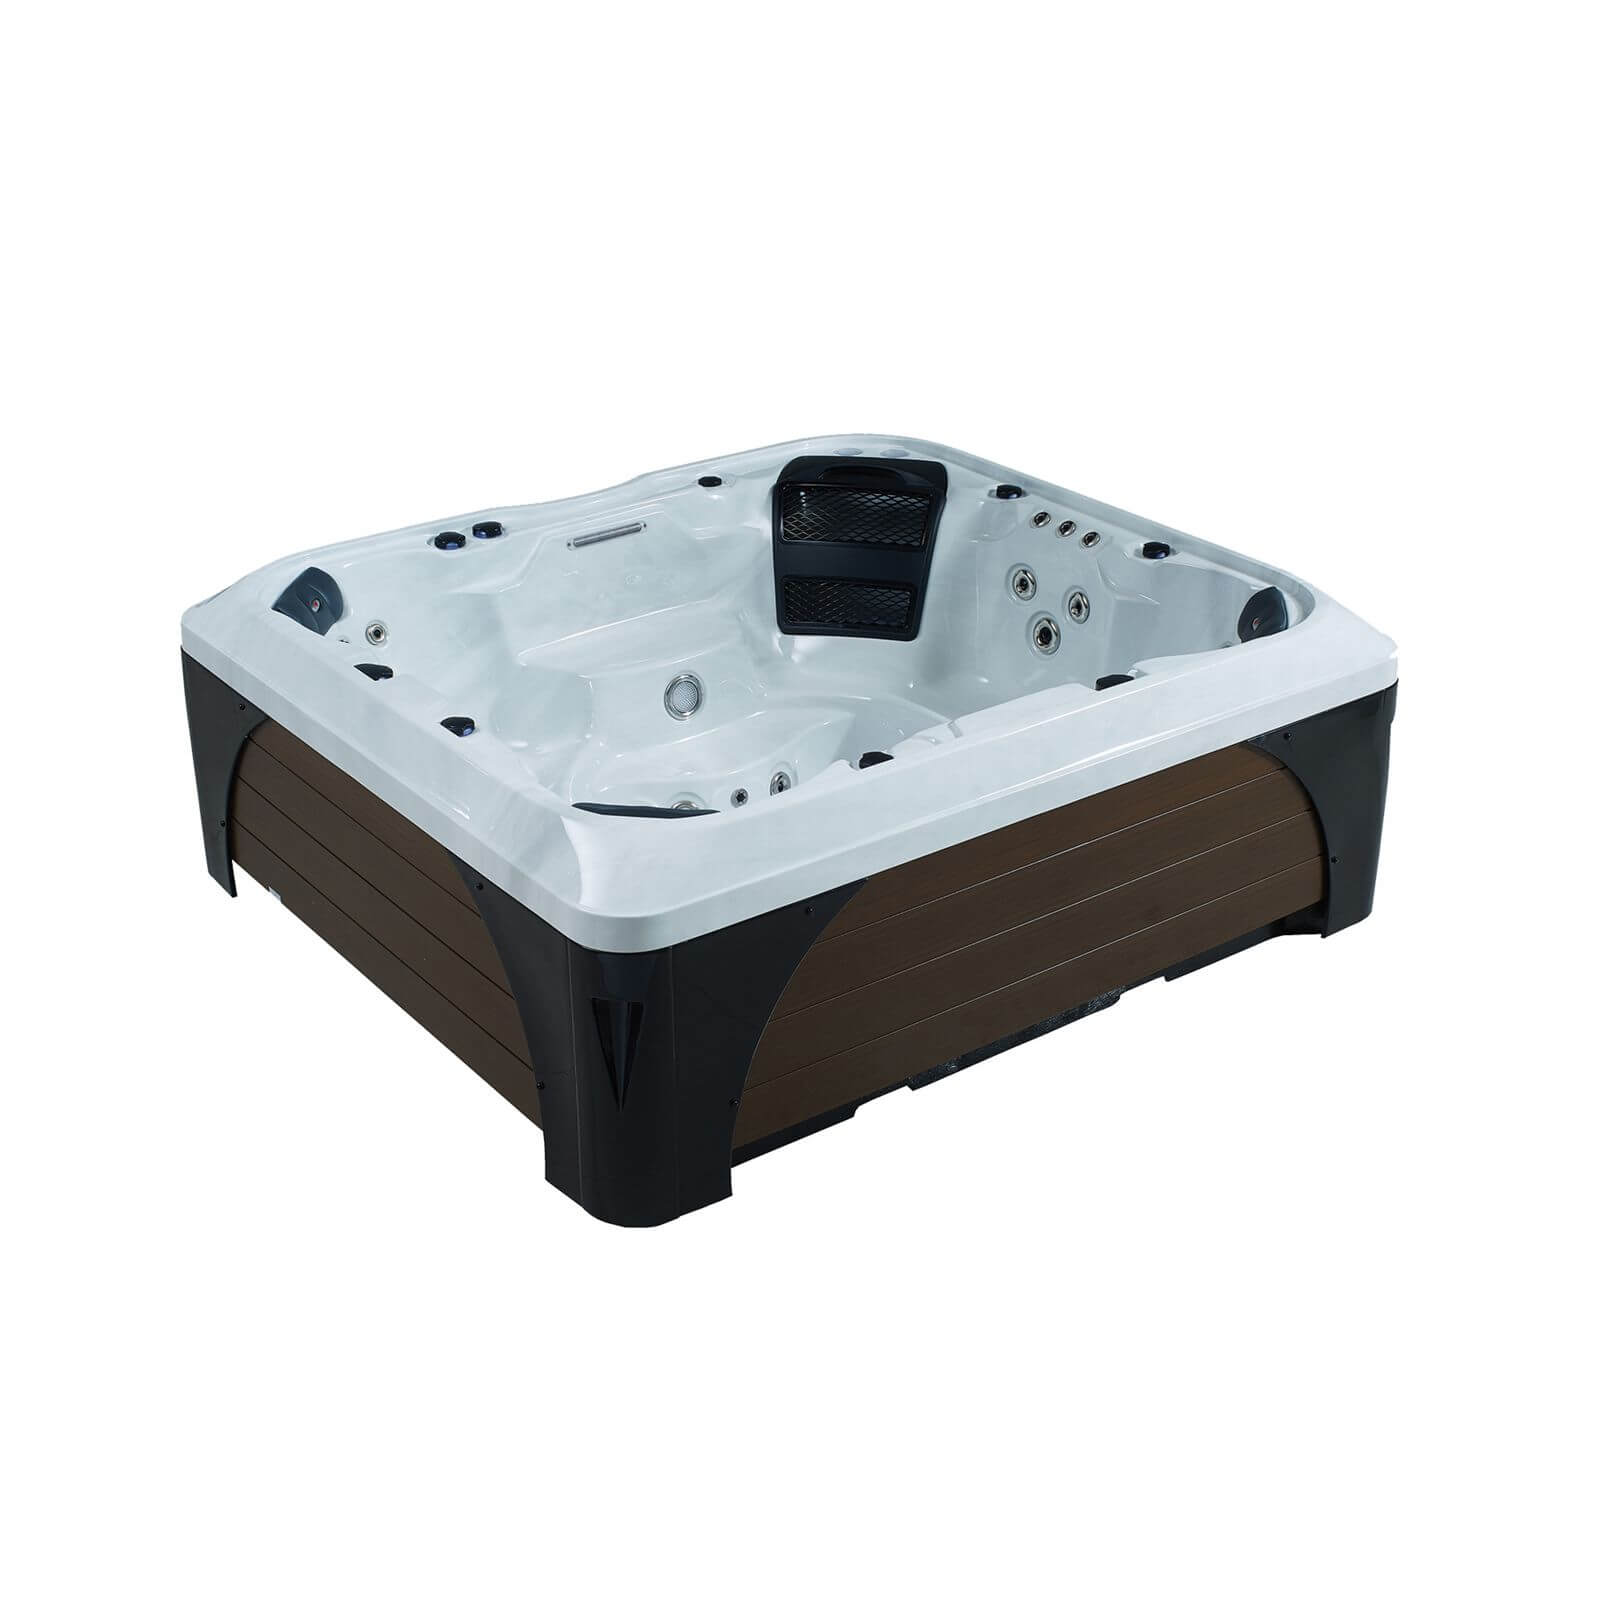 Canadian Spa Co. Kingston 55-Jet 7 Person Hot Tub